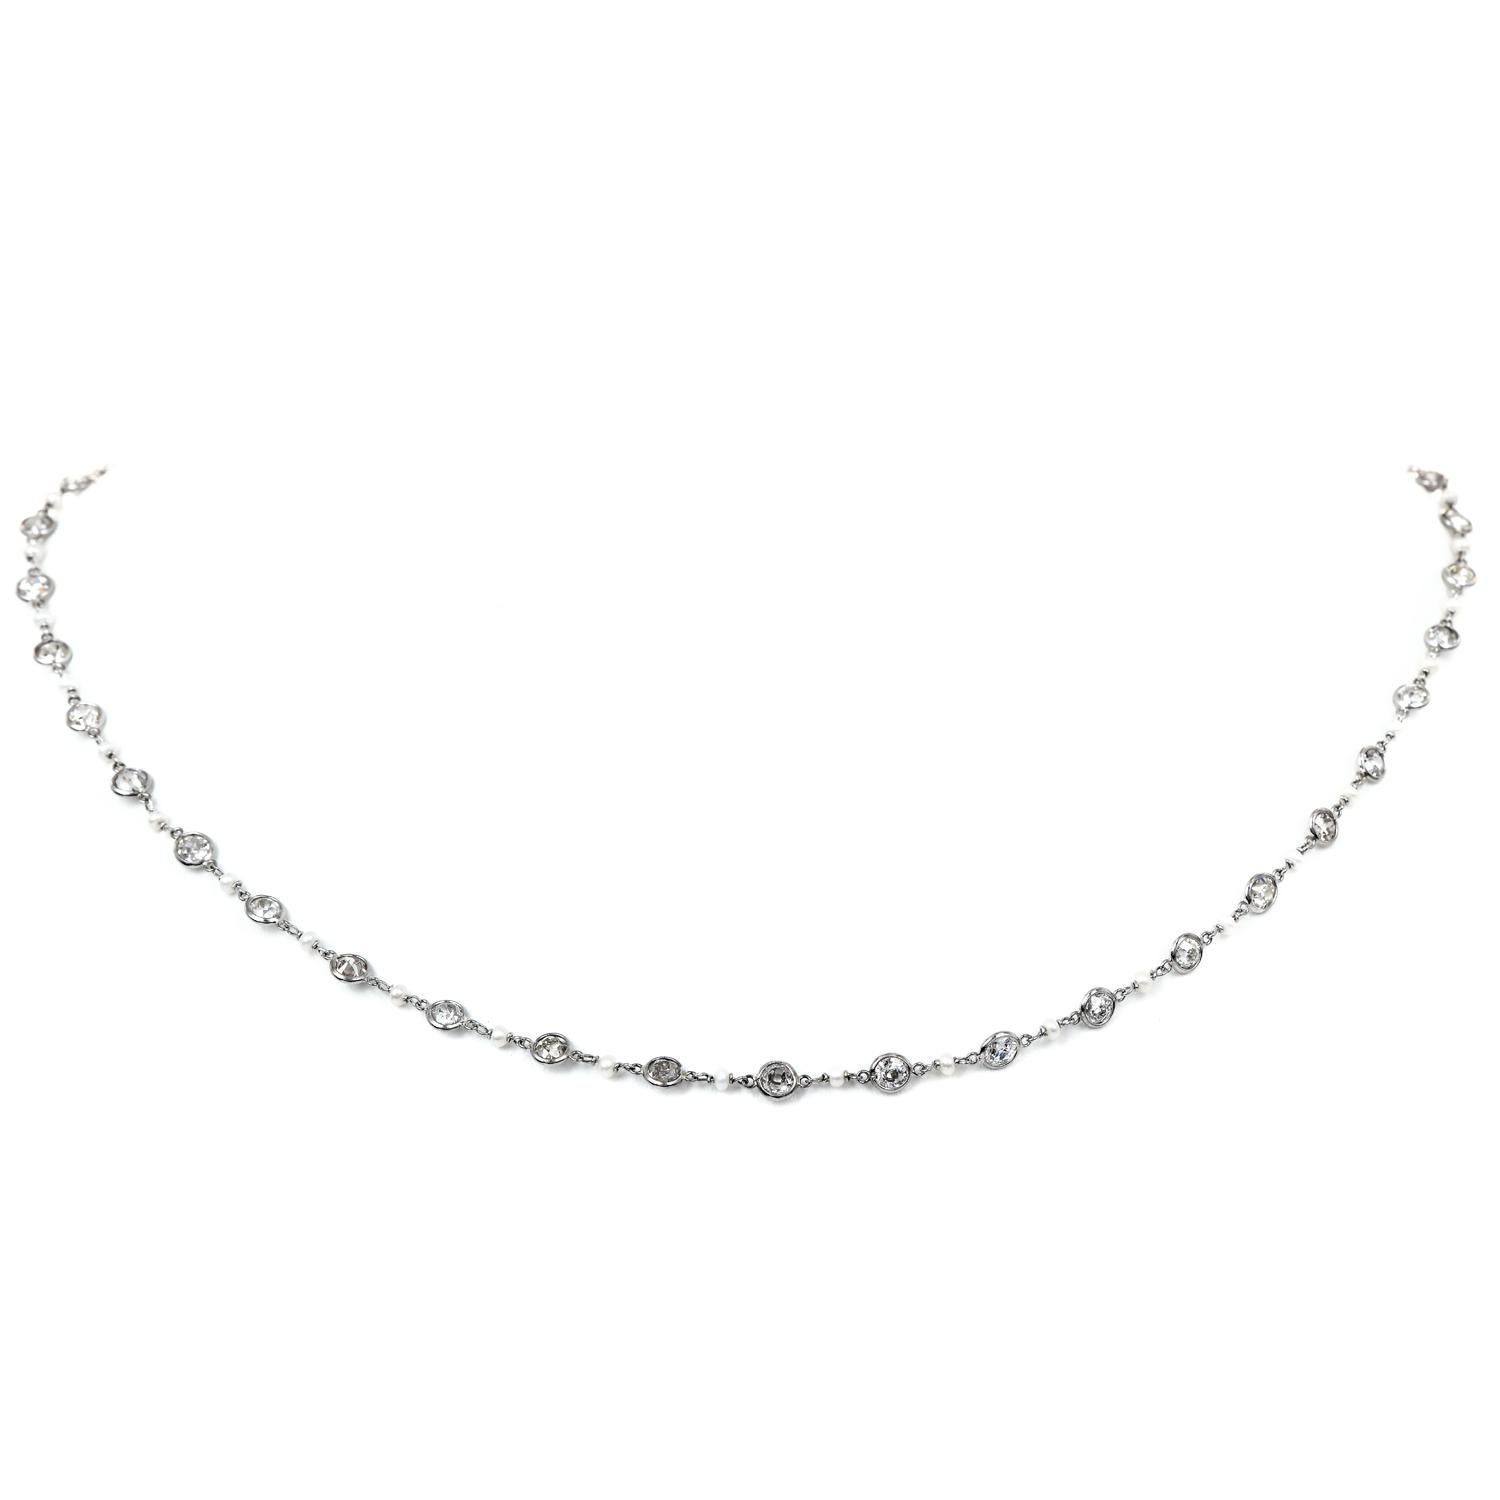 This shimmering and wearable diamond chain necklace is hand-crafted in solid platinum.

Weighing 6.2 grams and measuring 17.75” long. Exposing bezel-set, with approx. 38 high-quality round-cut diamonds, bezel-set, weighing approximately,